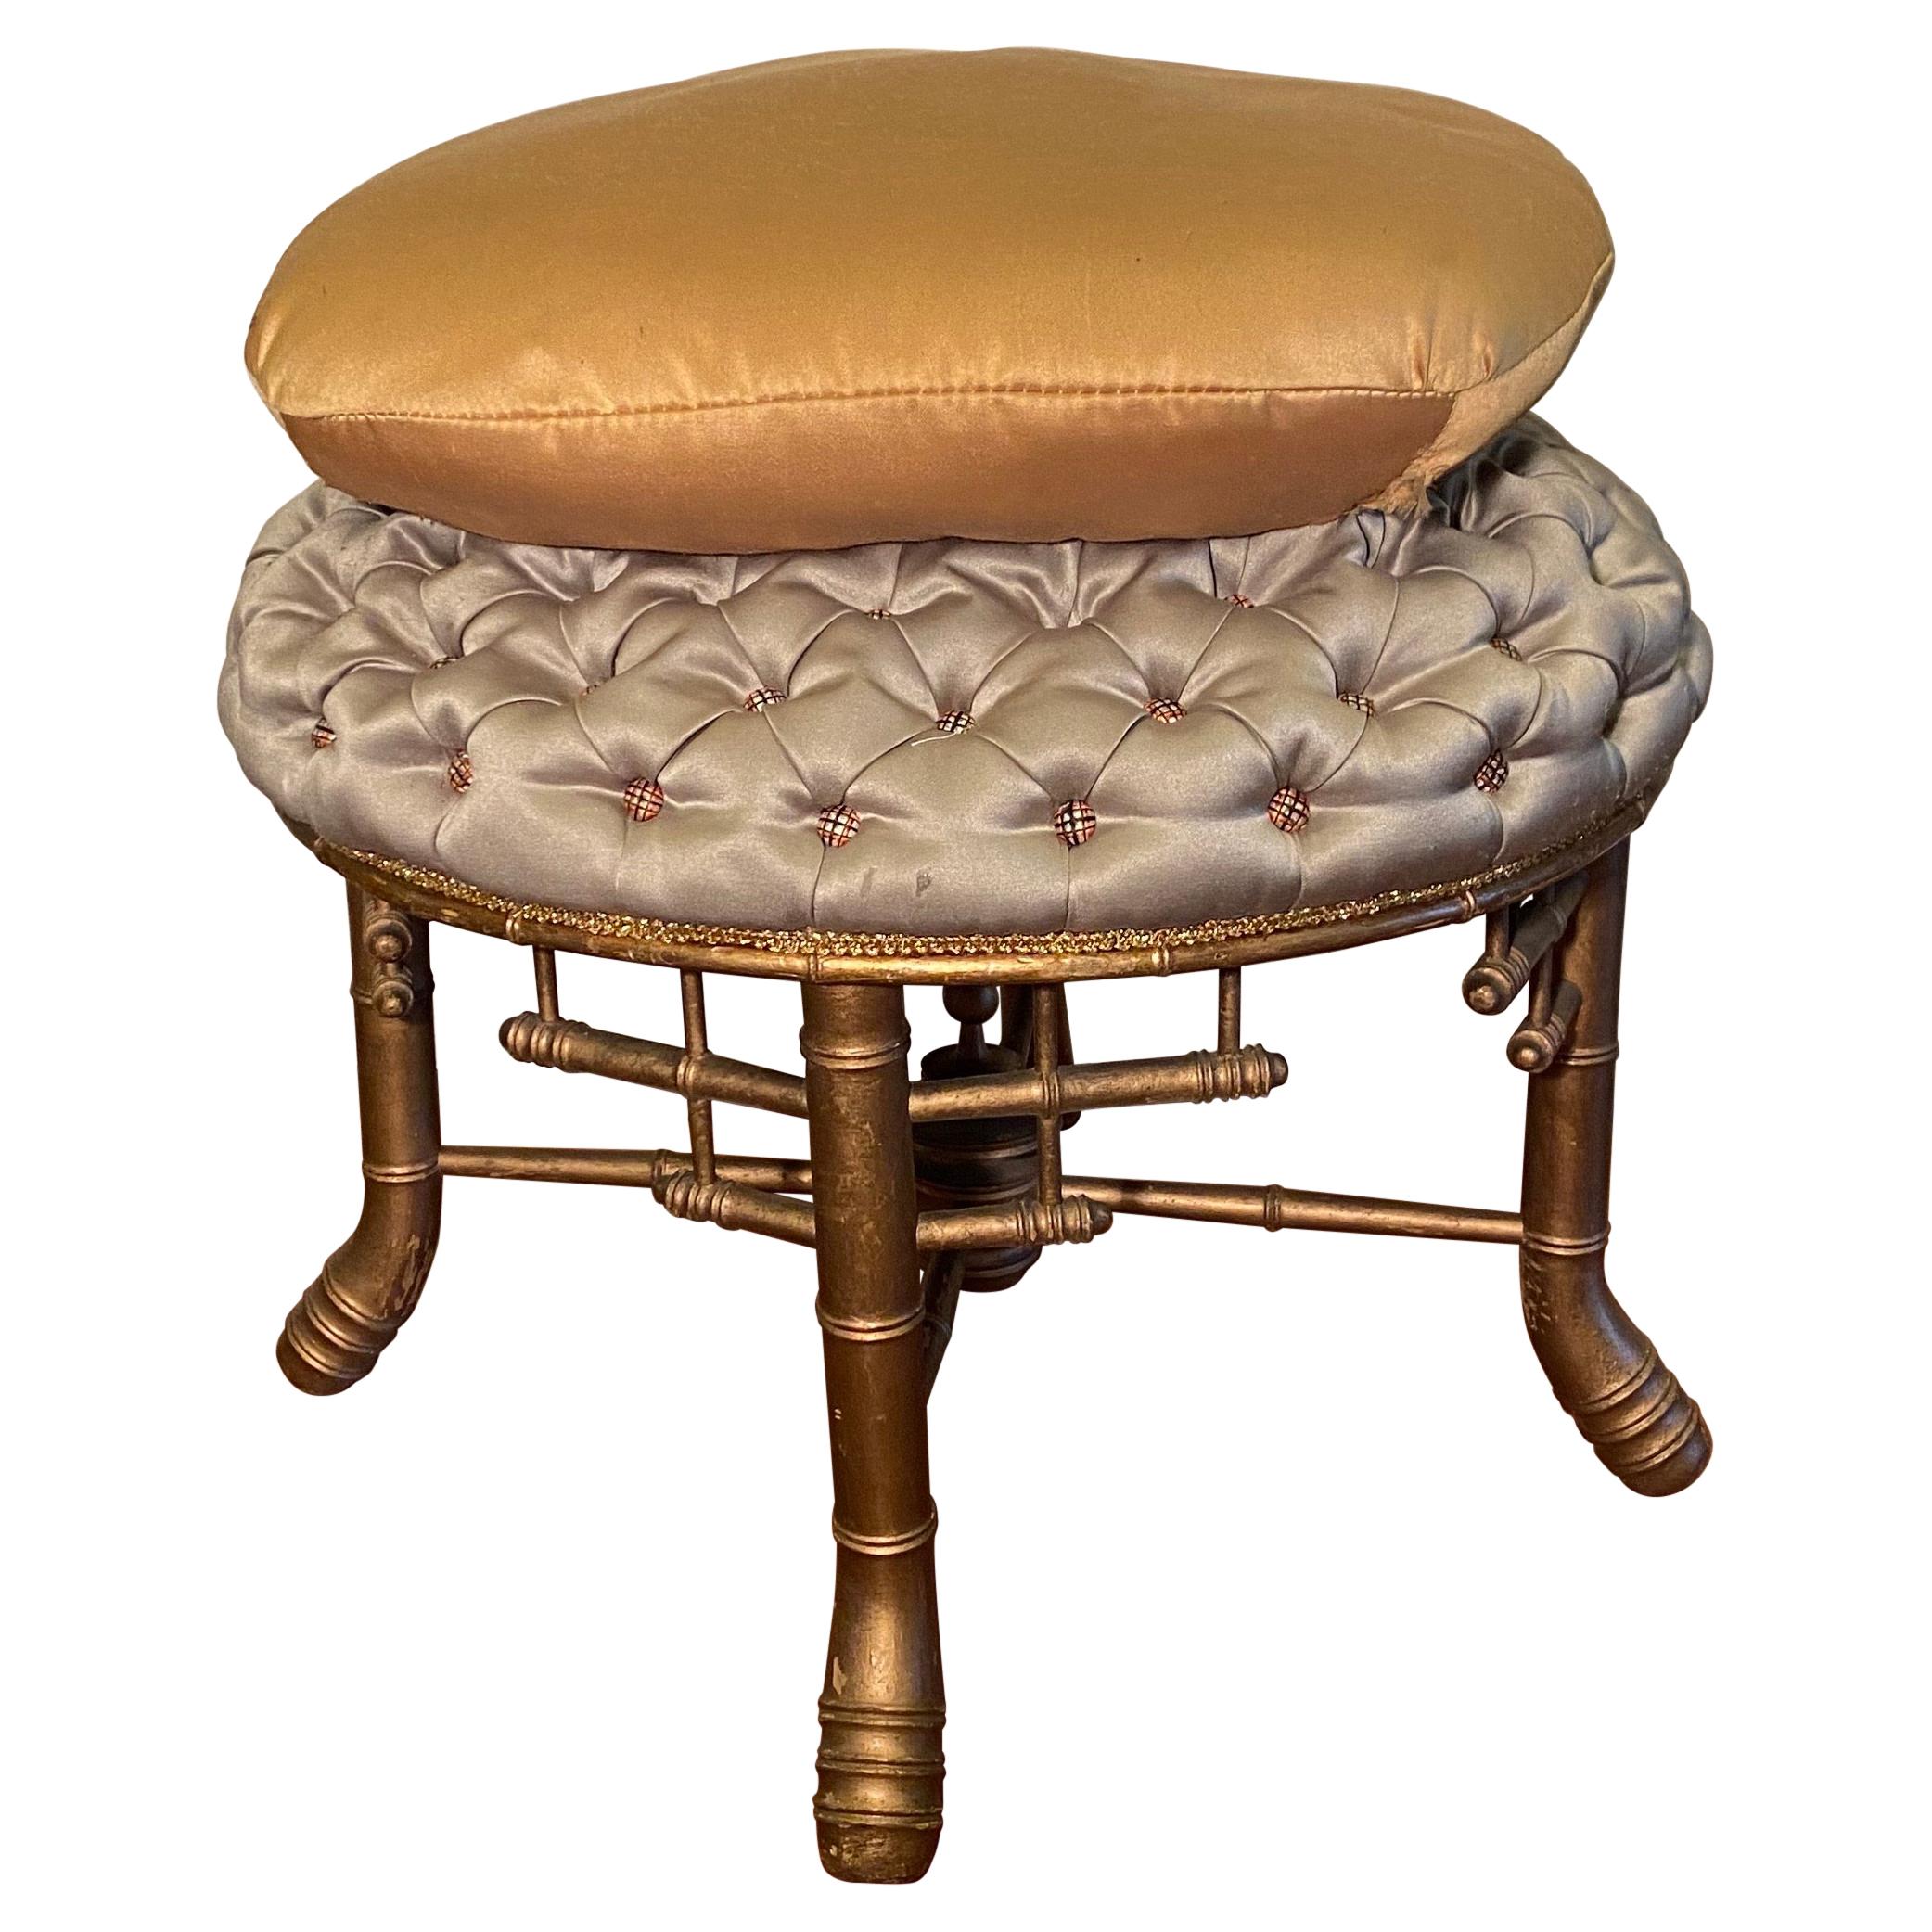 French Napoleon III FauxBamboo Tabouret For Sale at 1stDibs